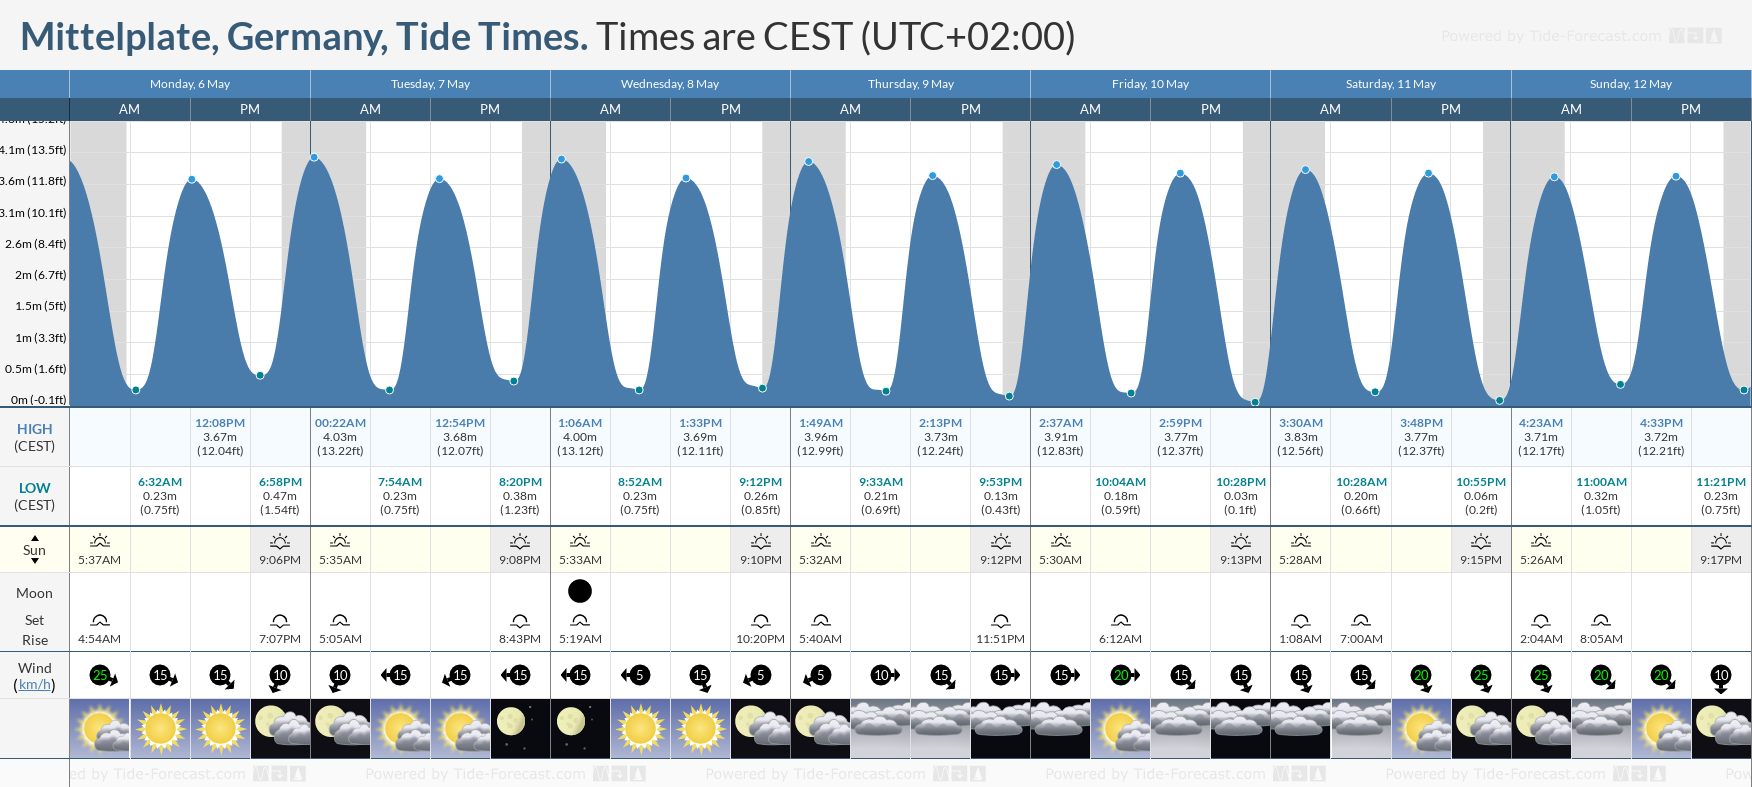 Mittelplate, Germany Tide Chart including high and low tide tide times for the next 7 days